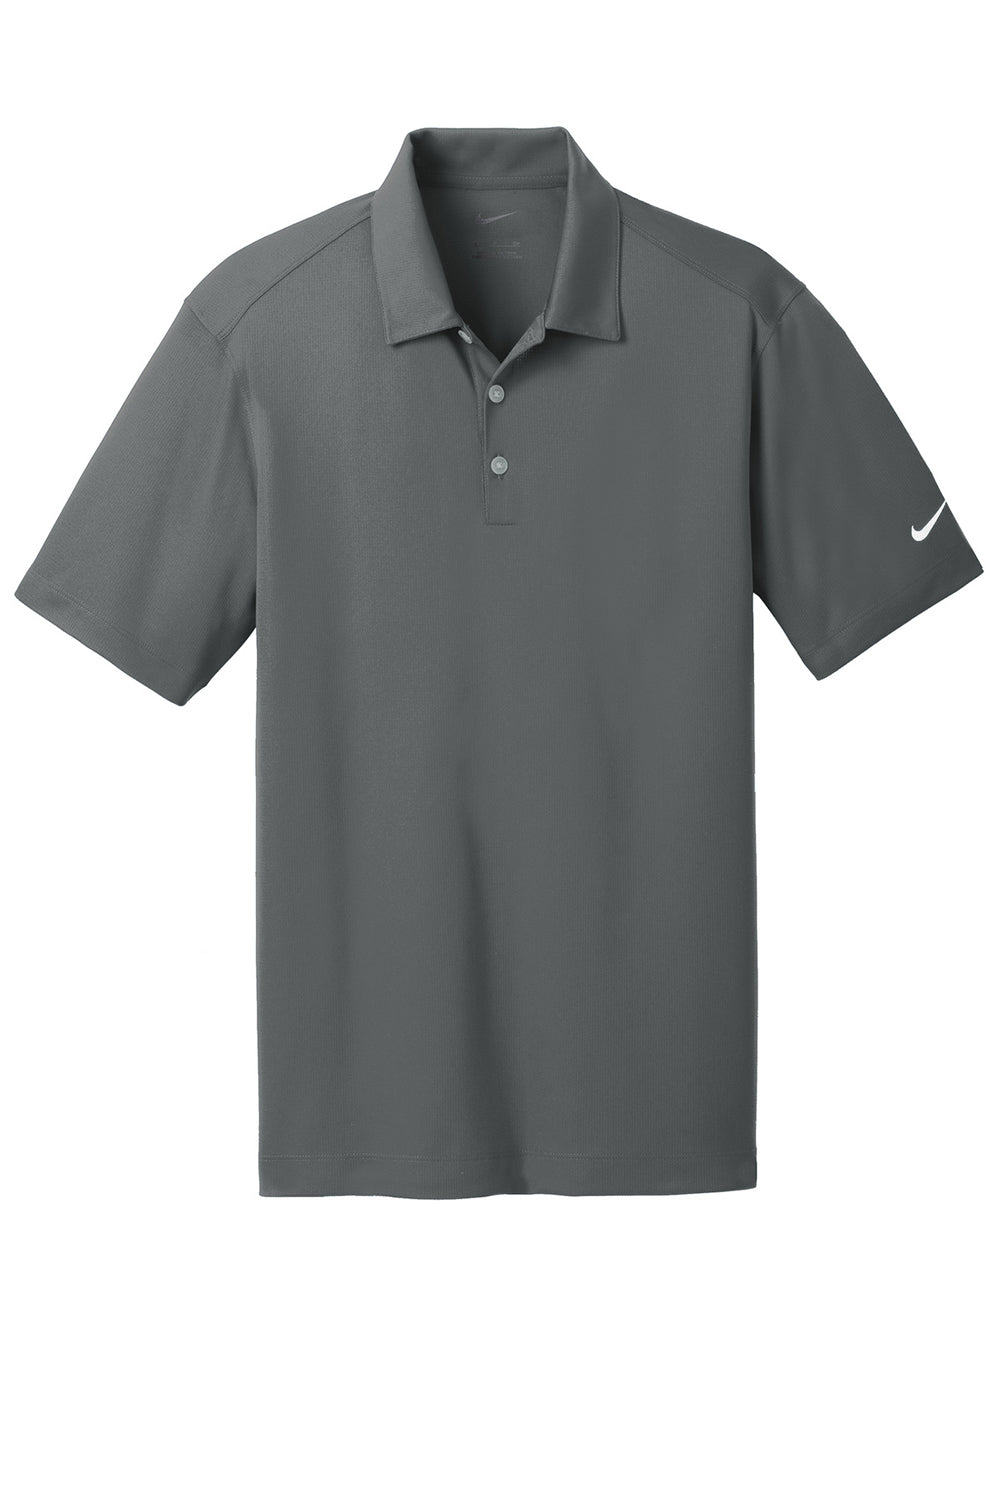 Nike 637167 Mens Dri-Fit Moisture Wicking Short Sleeve Polo Shirt Anthracite Grey Flat Front